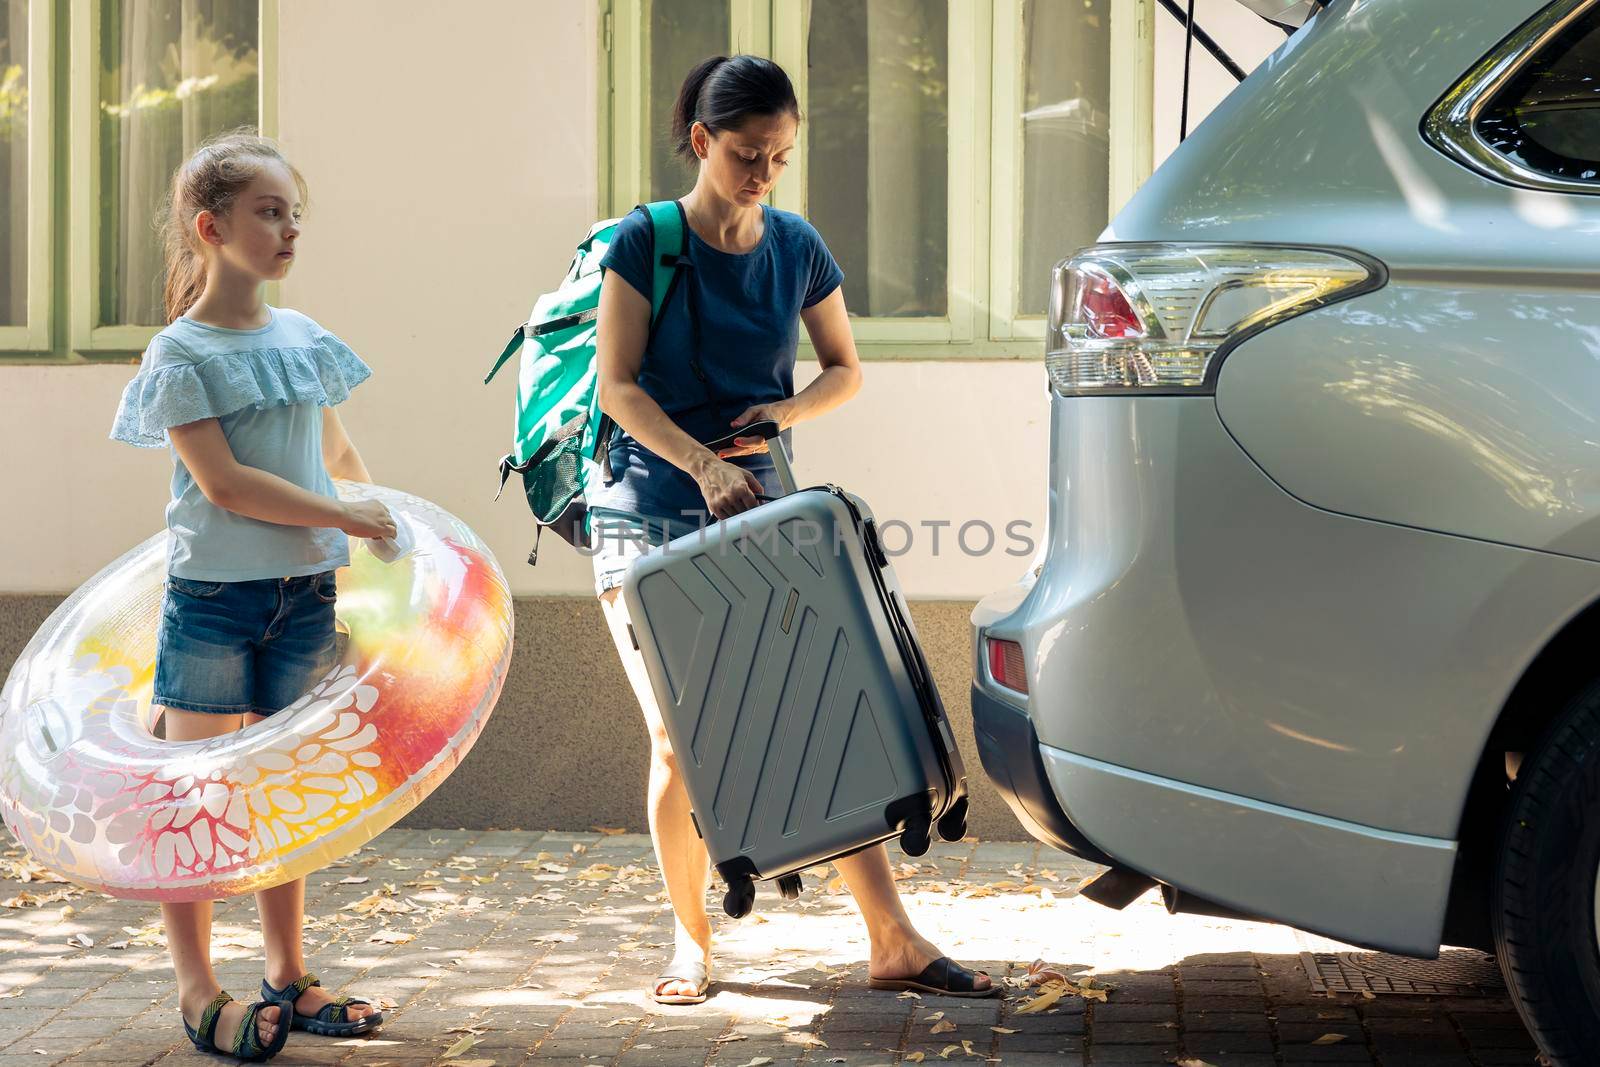 Mother and child travelling on vacation, loading baggage trolley and inflatable in vehicle trunk to go to seaside destination during summer holiday. Woman and little girl leaving on road trip.